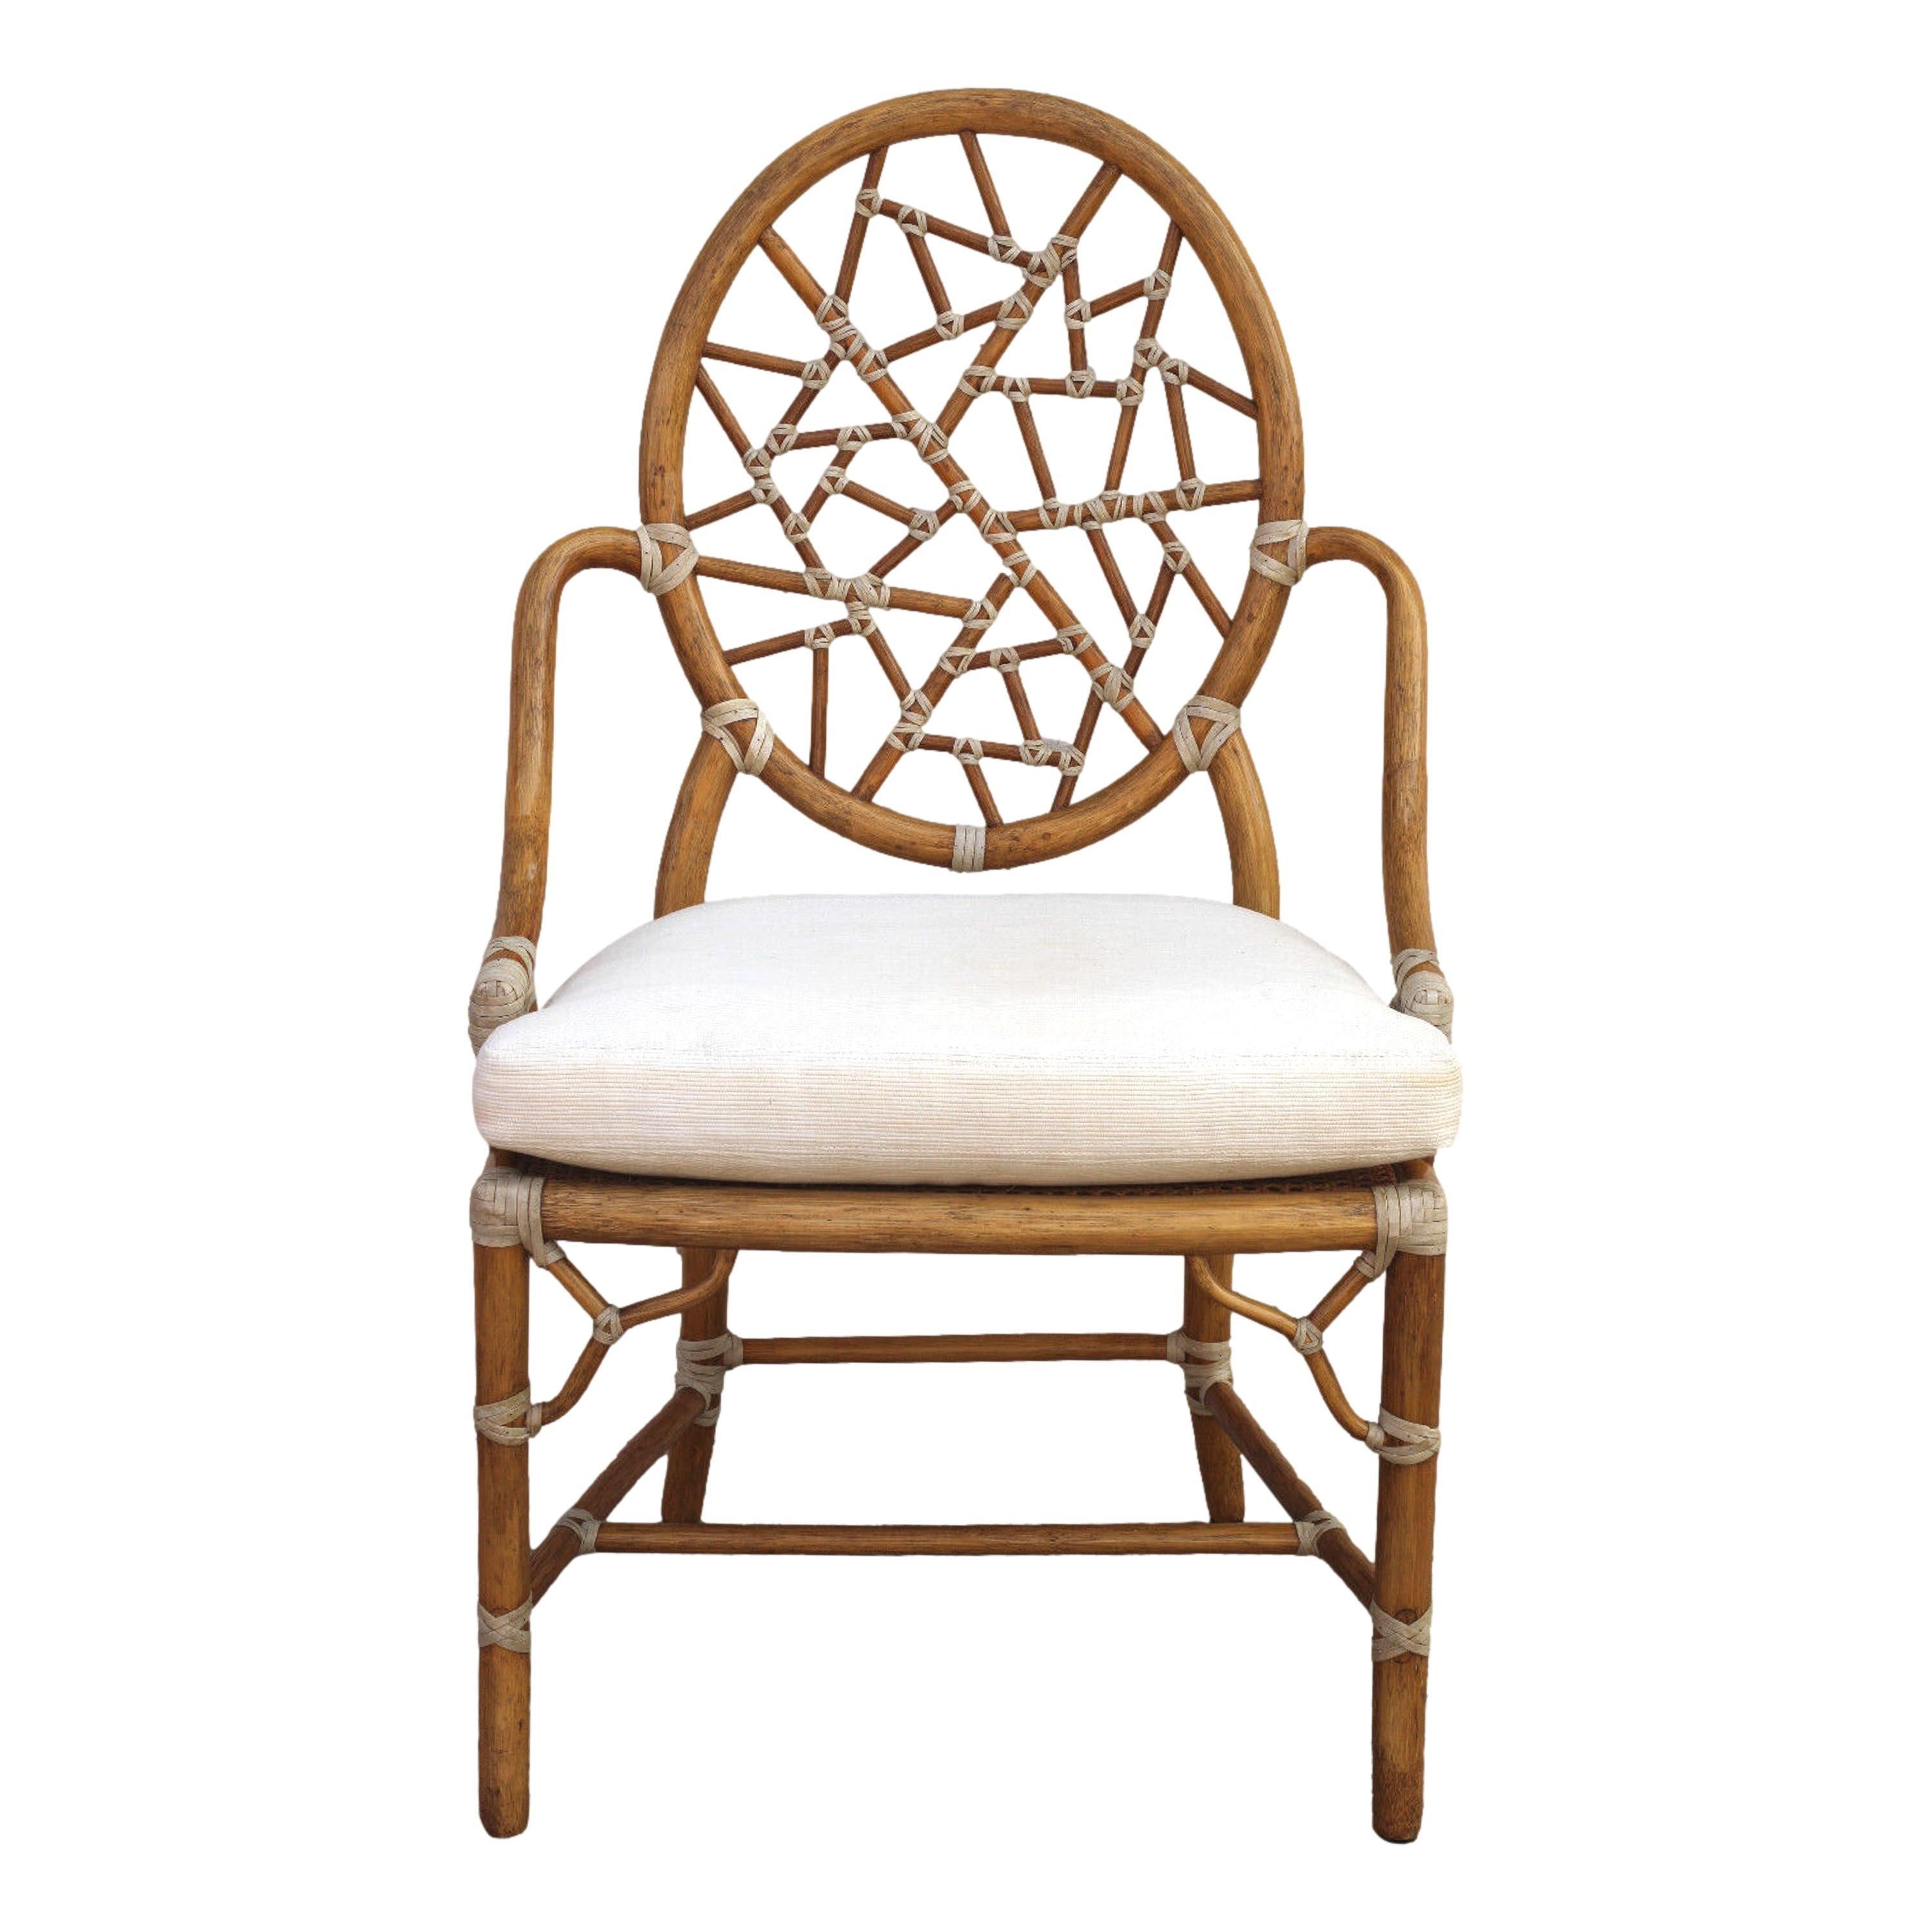 A set of six iconic cracked ice chairs designed by breakthrough innovator Elinor McGuire in 1968. The design is famous for its rattan oval back that frames smaller rattan pieces bound by rawhide, creating the impression of cracked ice or shattered